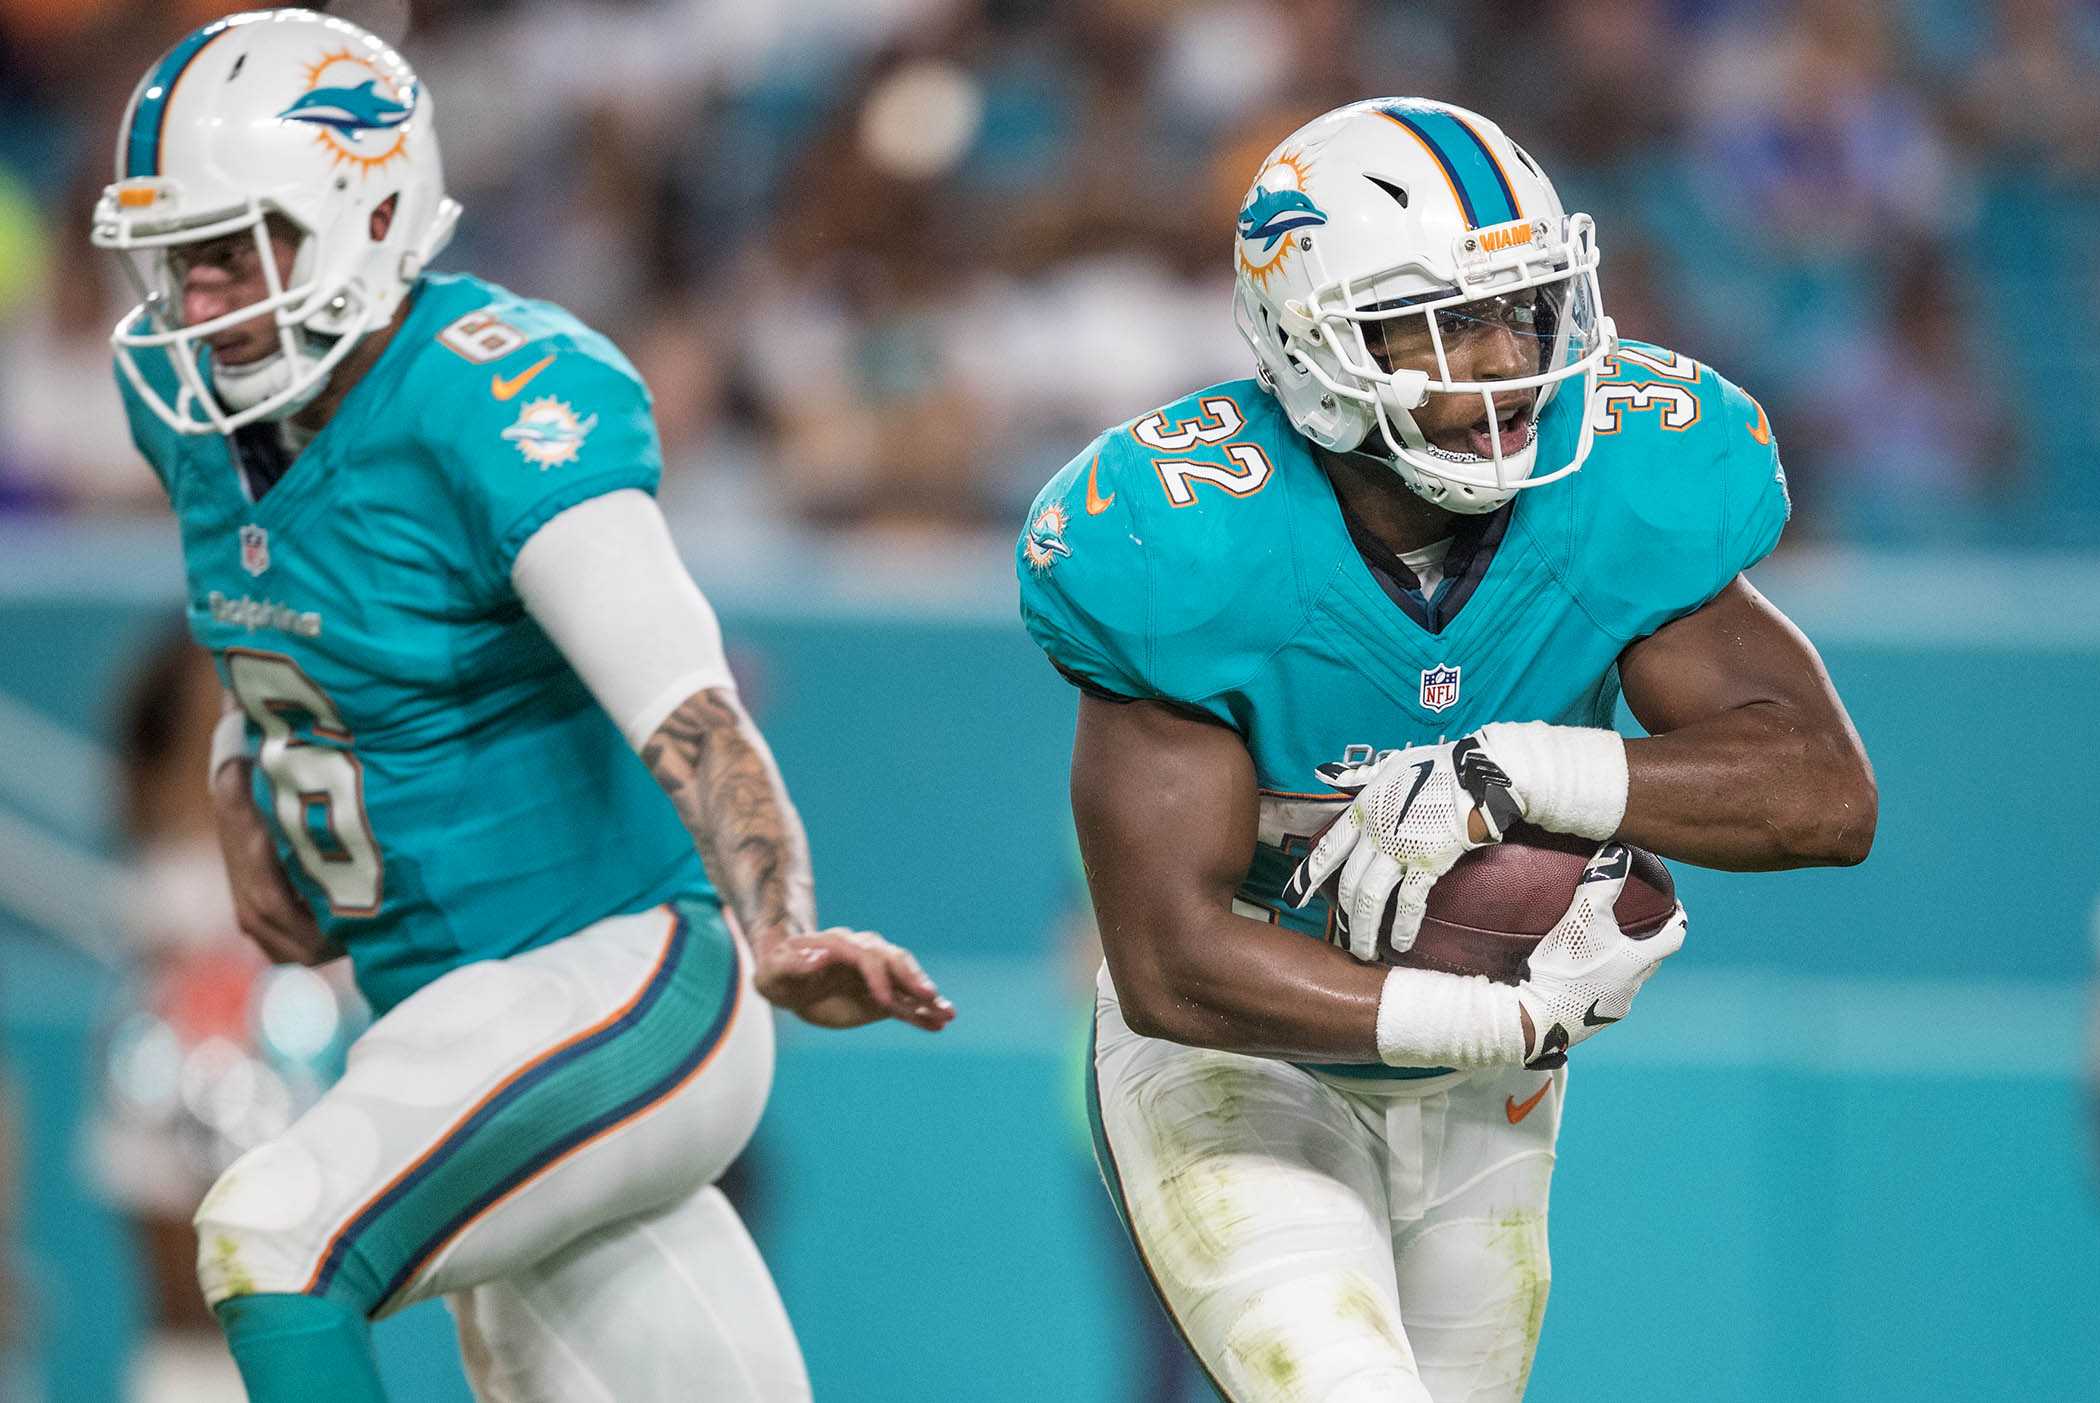 Los Angeles Chargers vs. Miami Dolphins - 11/15/2020 Free Pick & NFL Betting Prediction